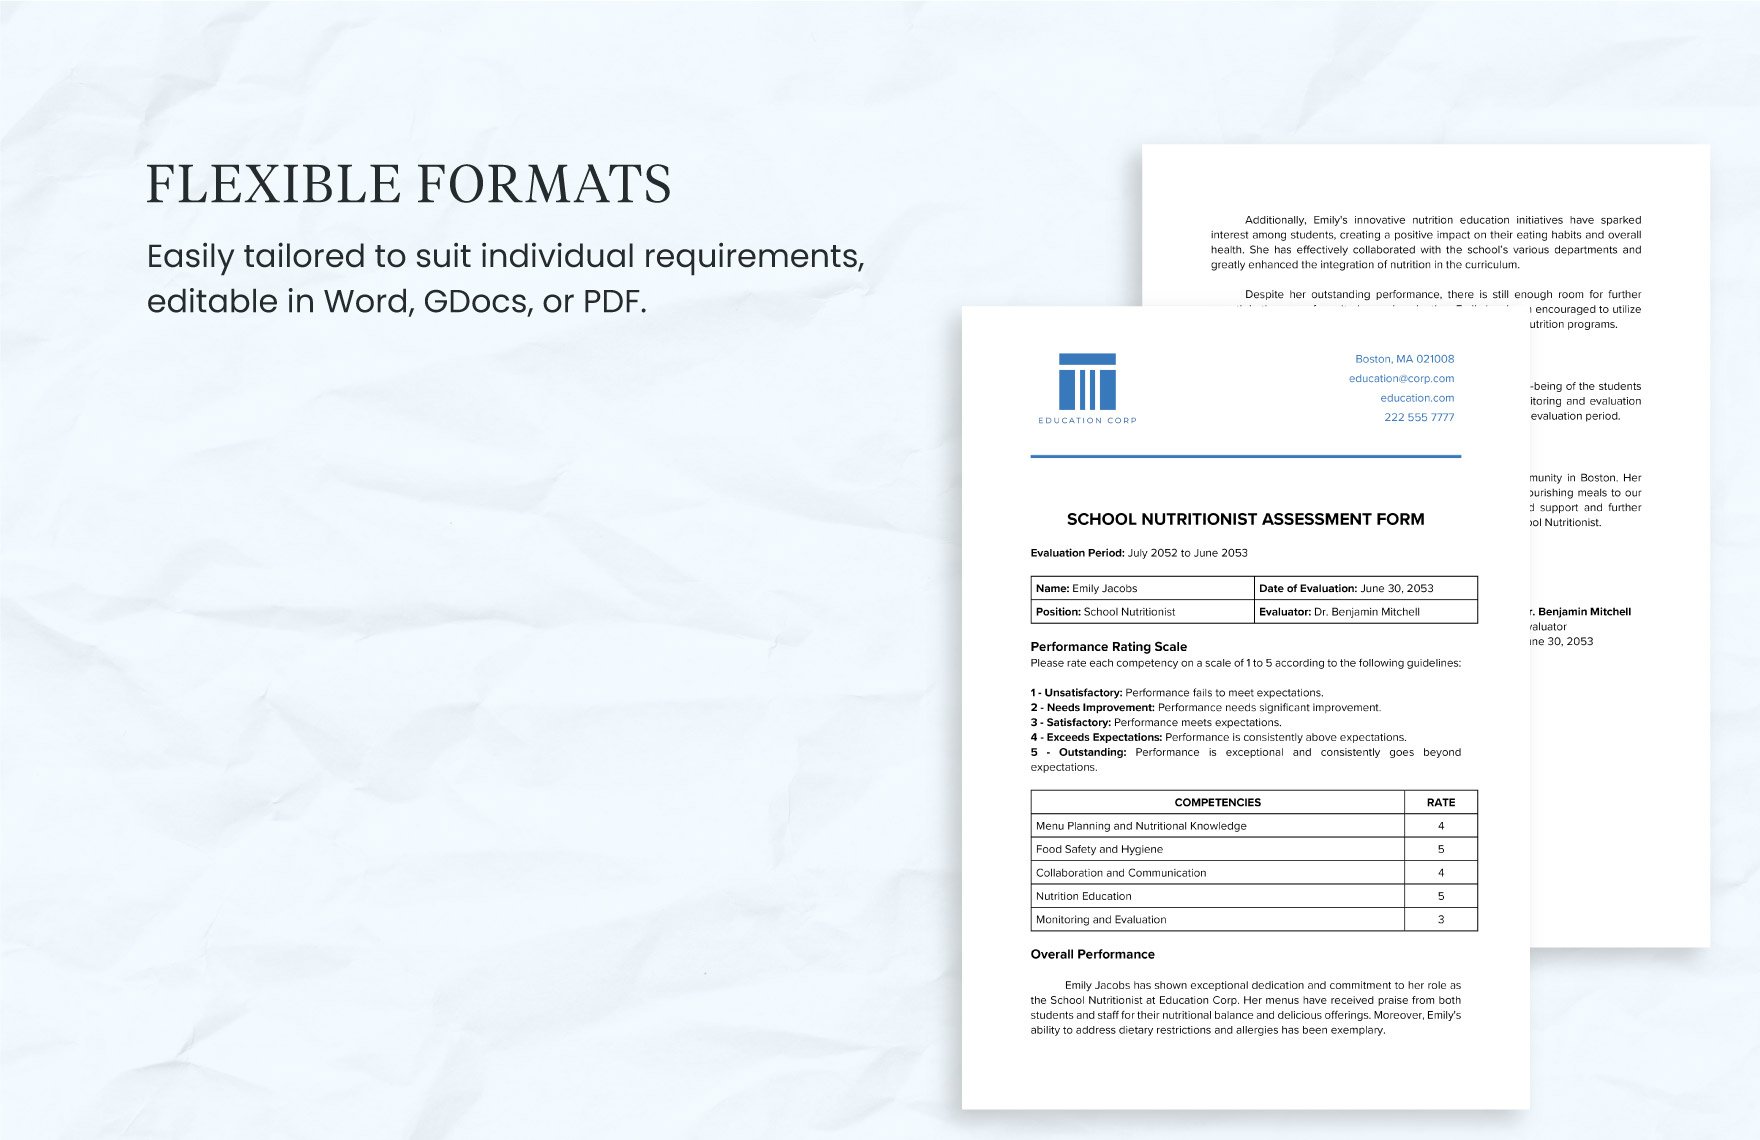 School Nutritionist Assessment Form Template